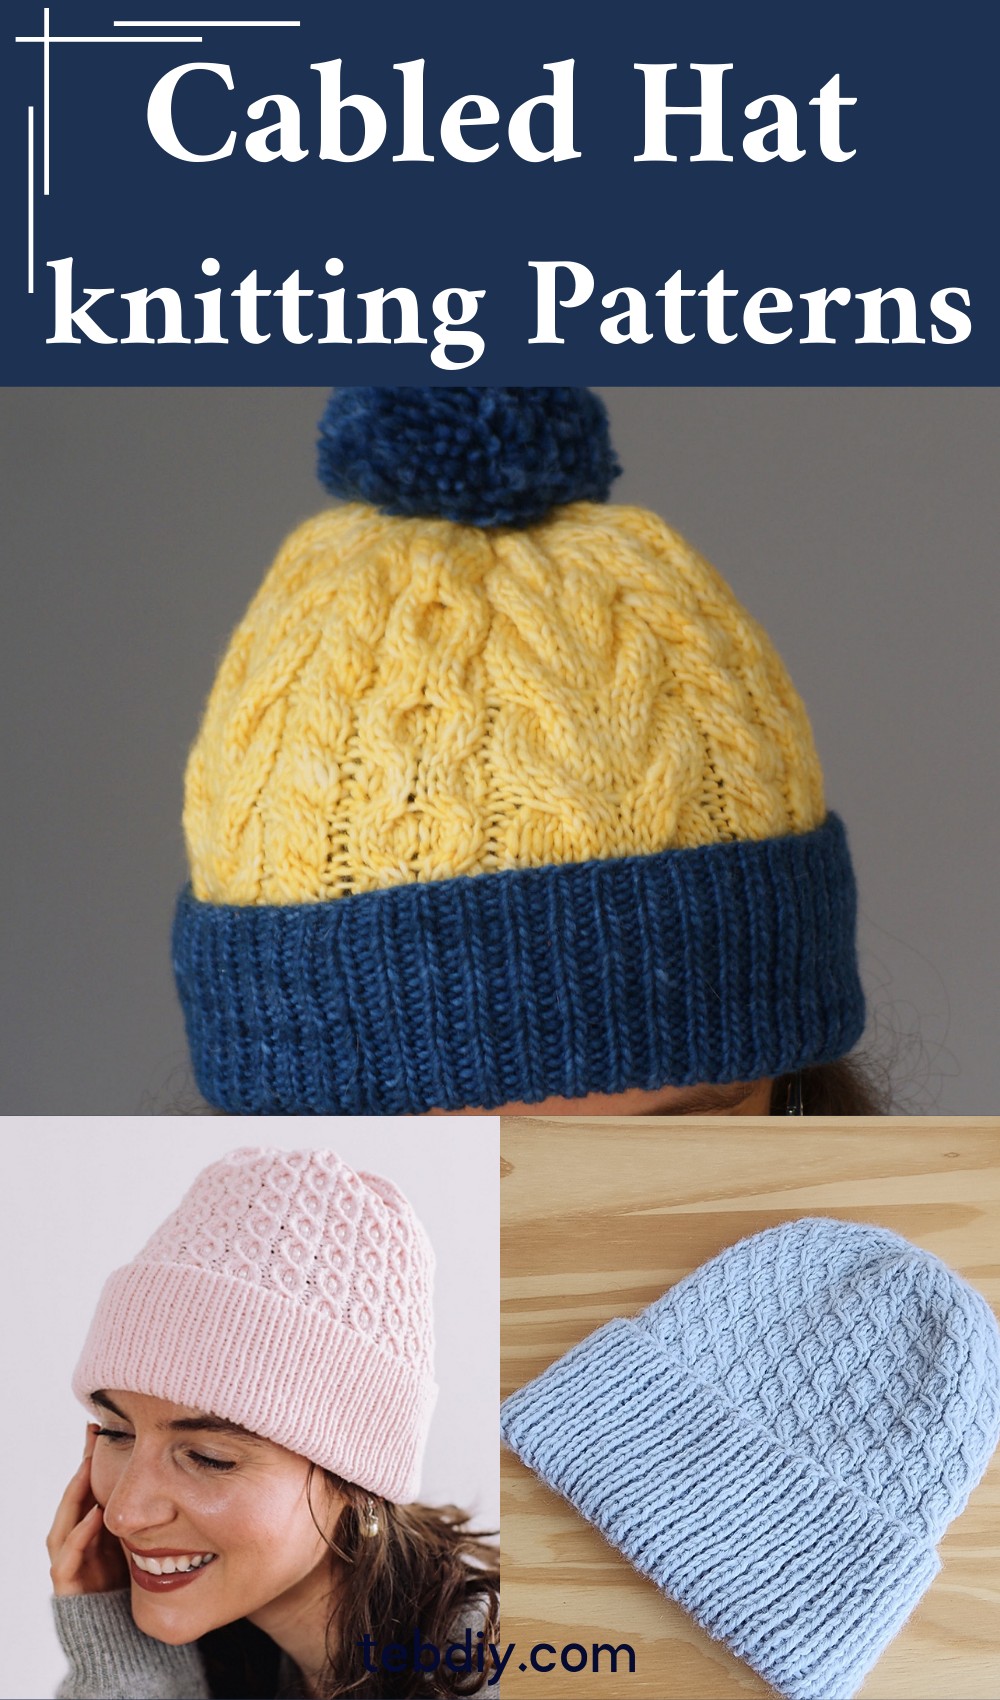 Knit Cabled Hat Patterns